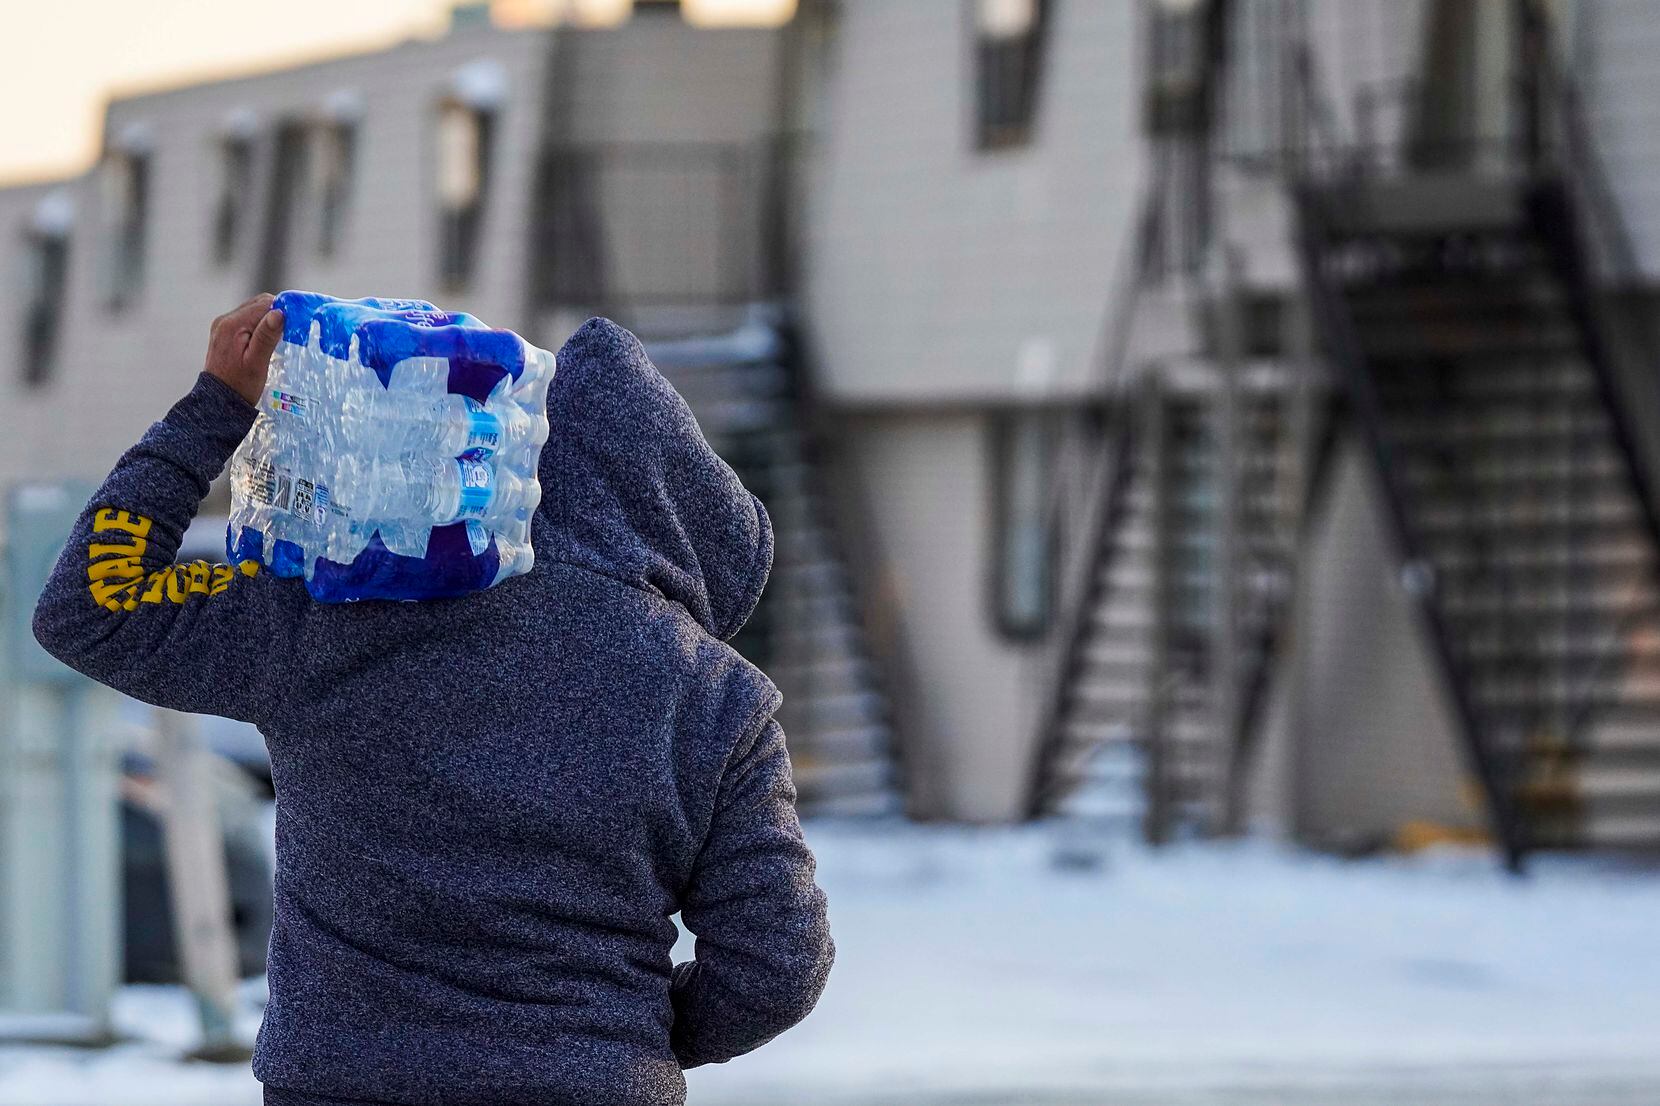 A man walked home with drinking water that was distributed at the nonprofit Literacy Achieves in the Vickery Meadows neighborhood in Northeast Dallas on Feb. 18 as area residents reeled from the effects of the winter storm.